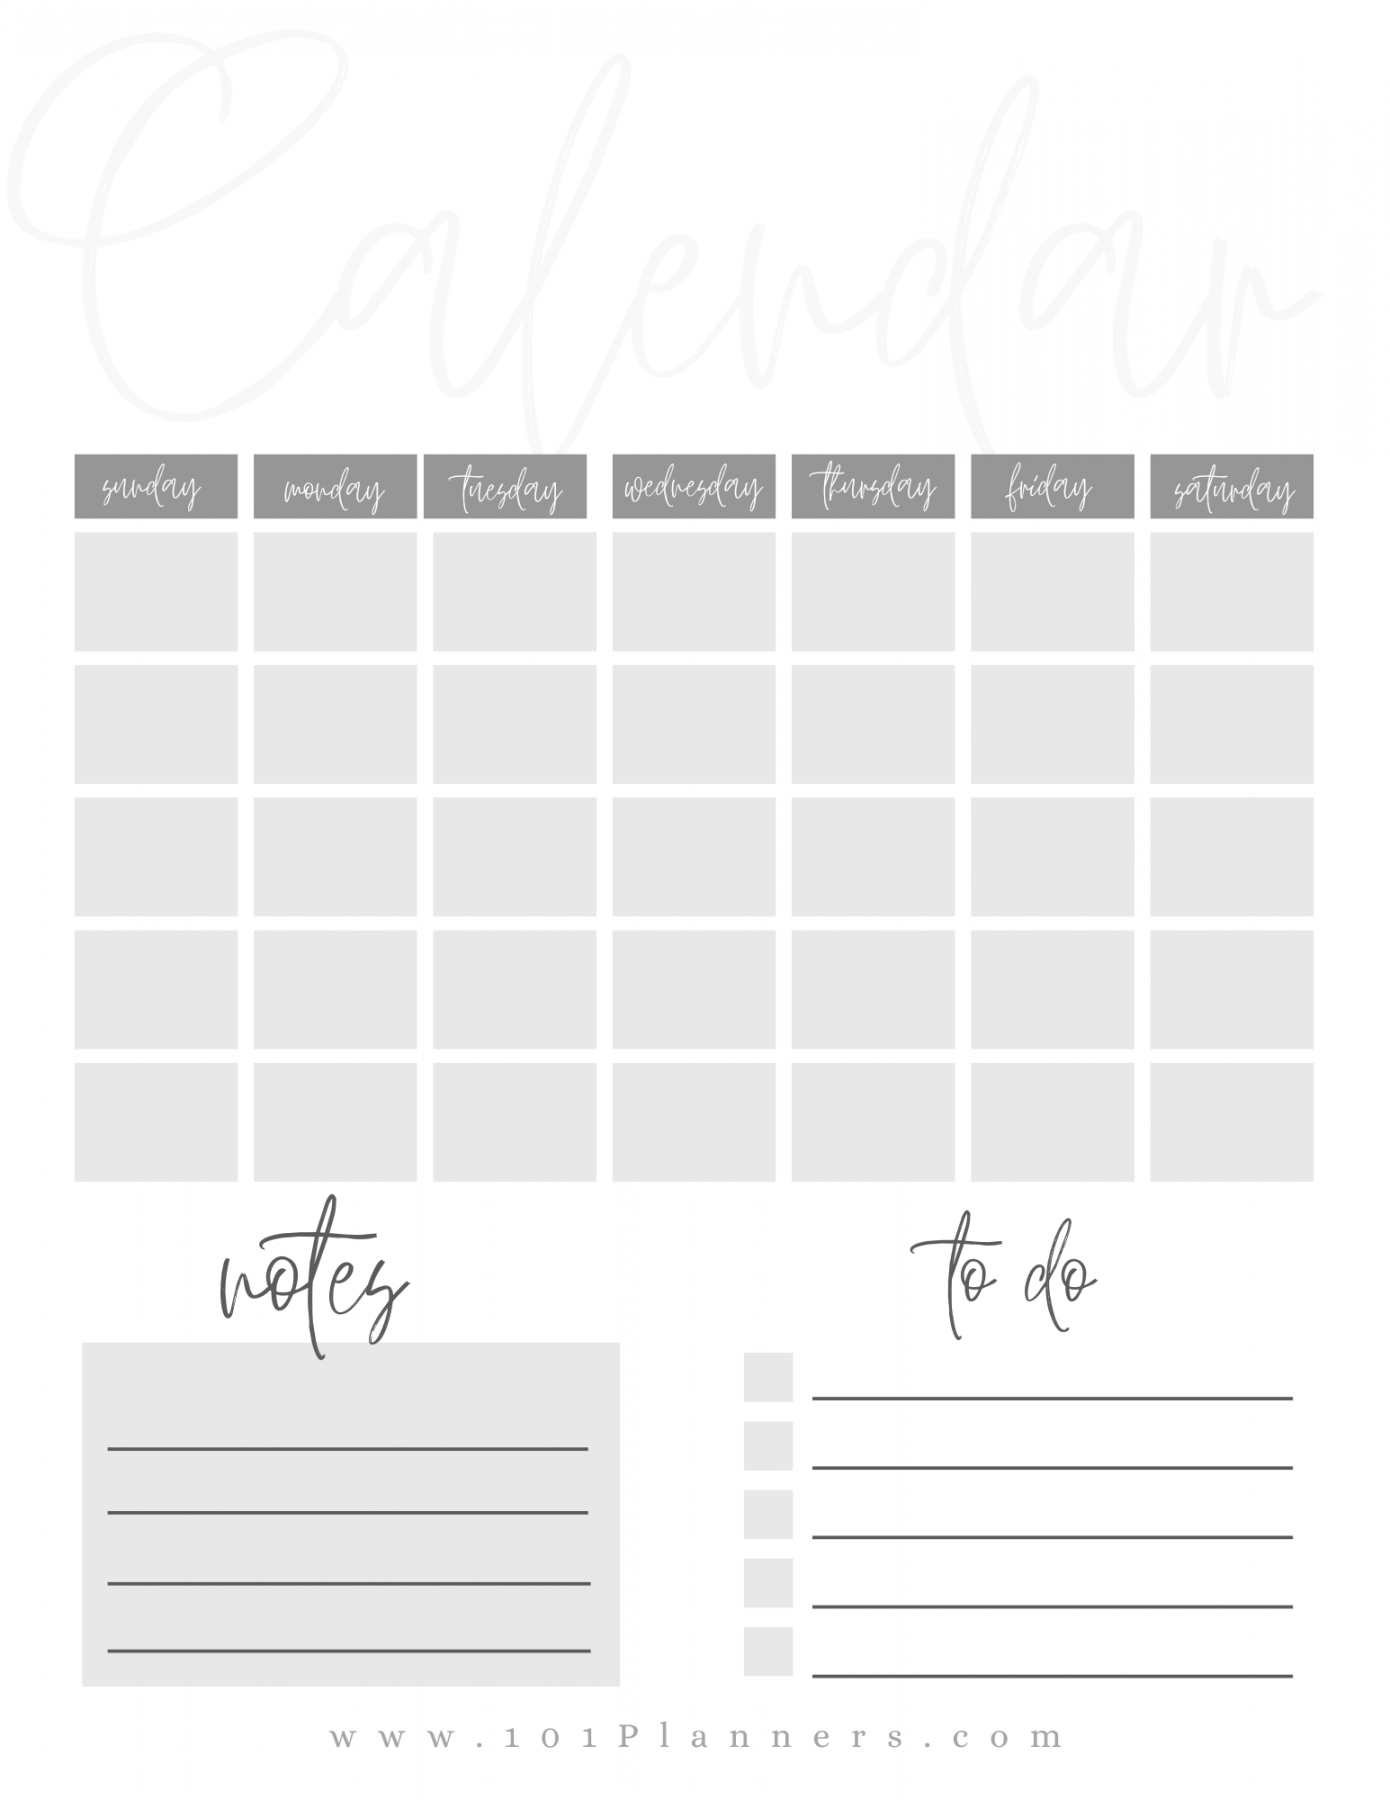 FREE Blank Calendar Templates  Word, Excel, PDF for any month